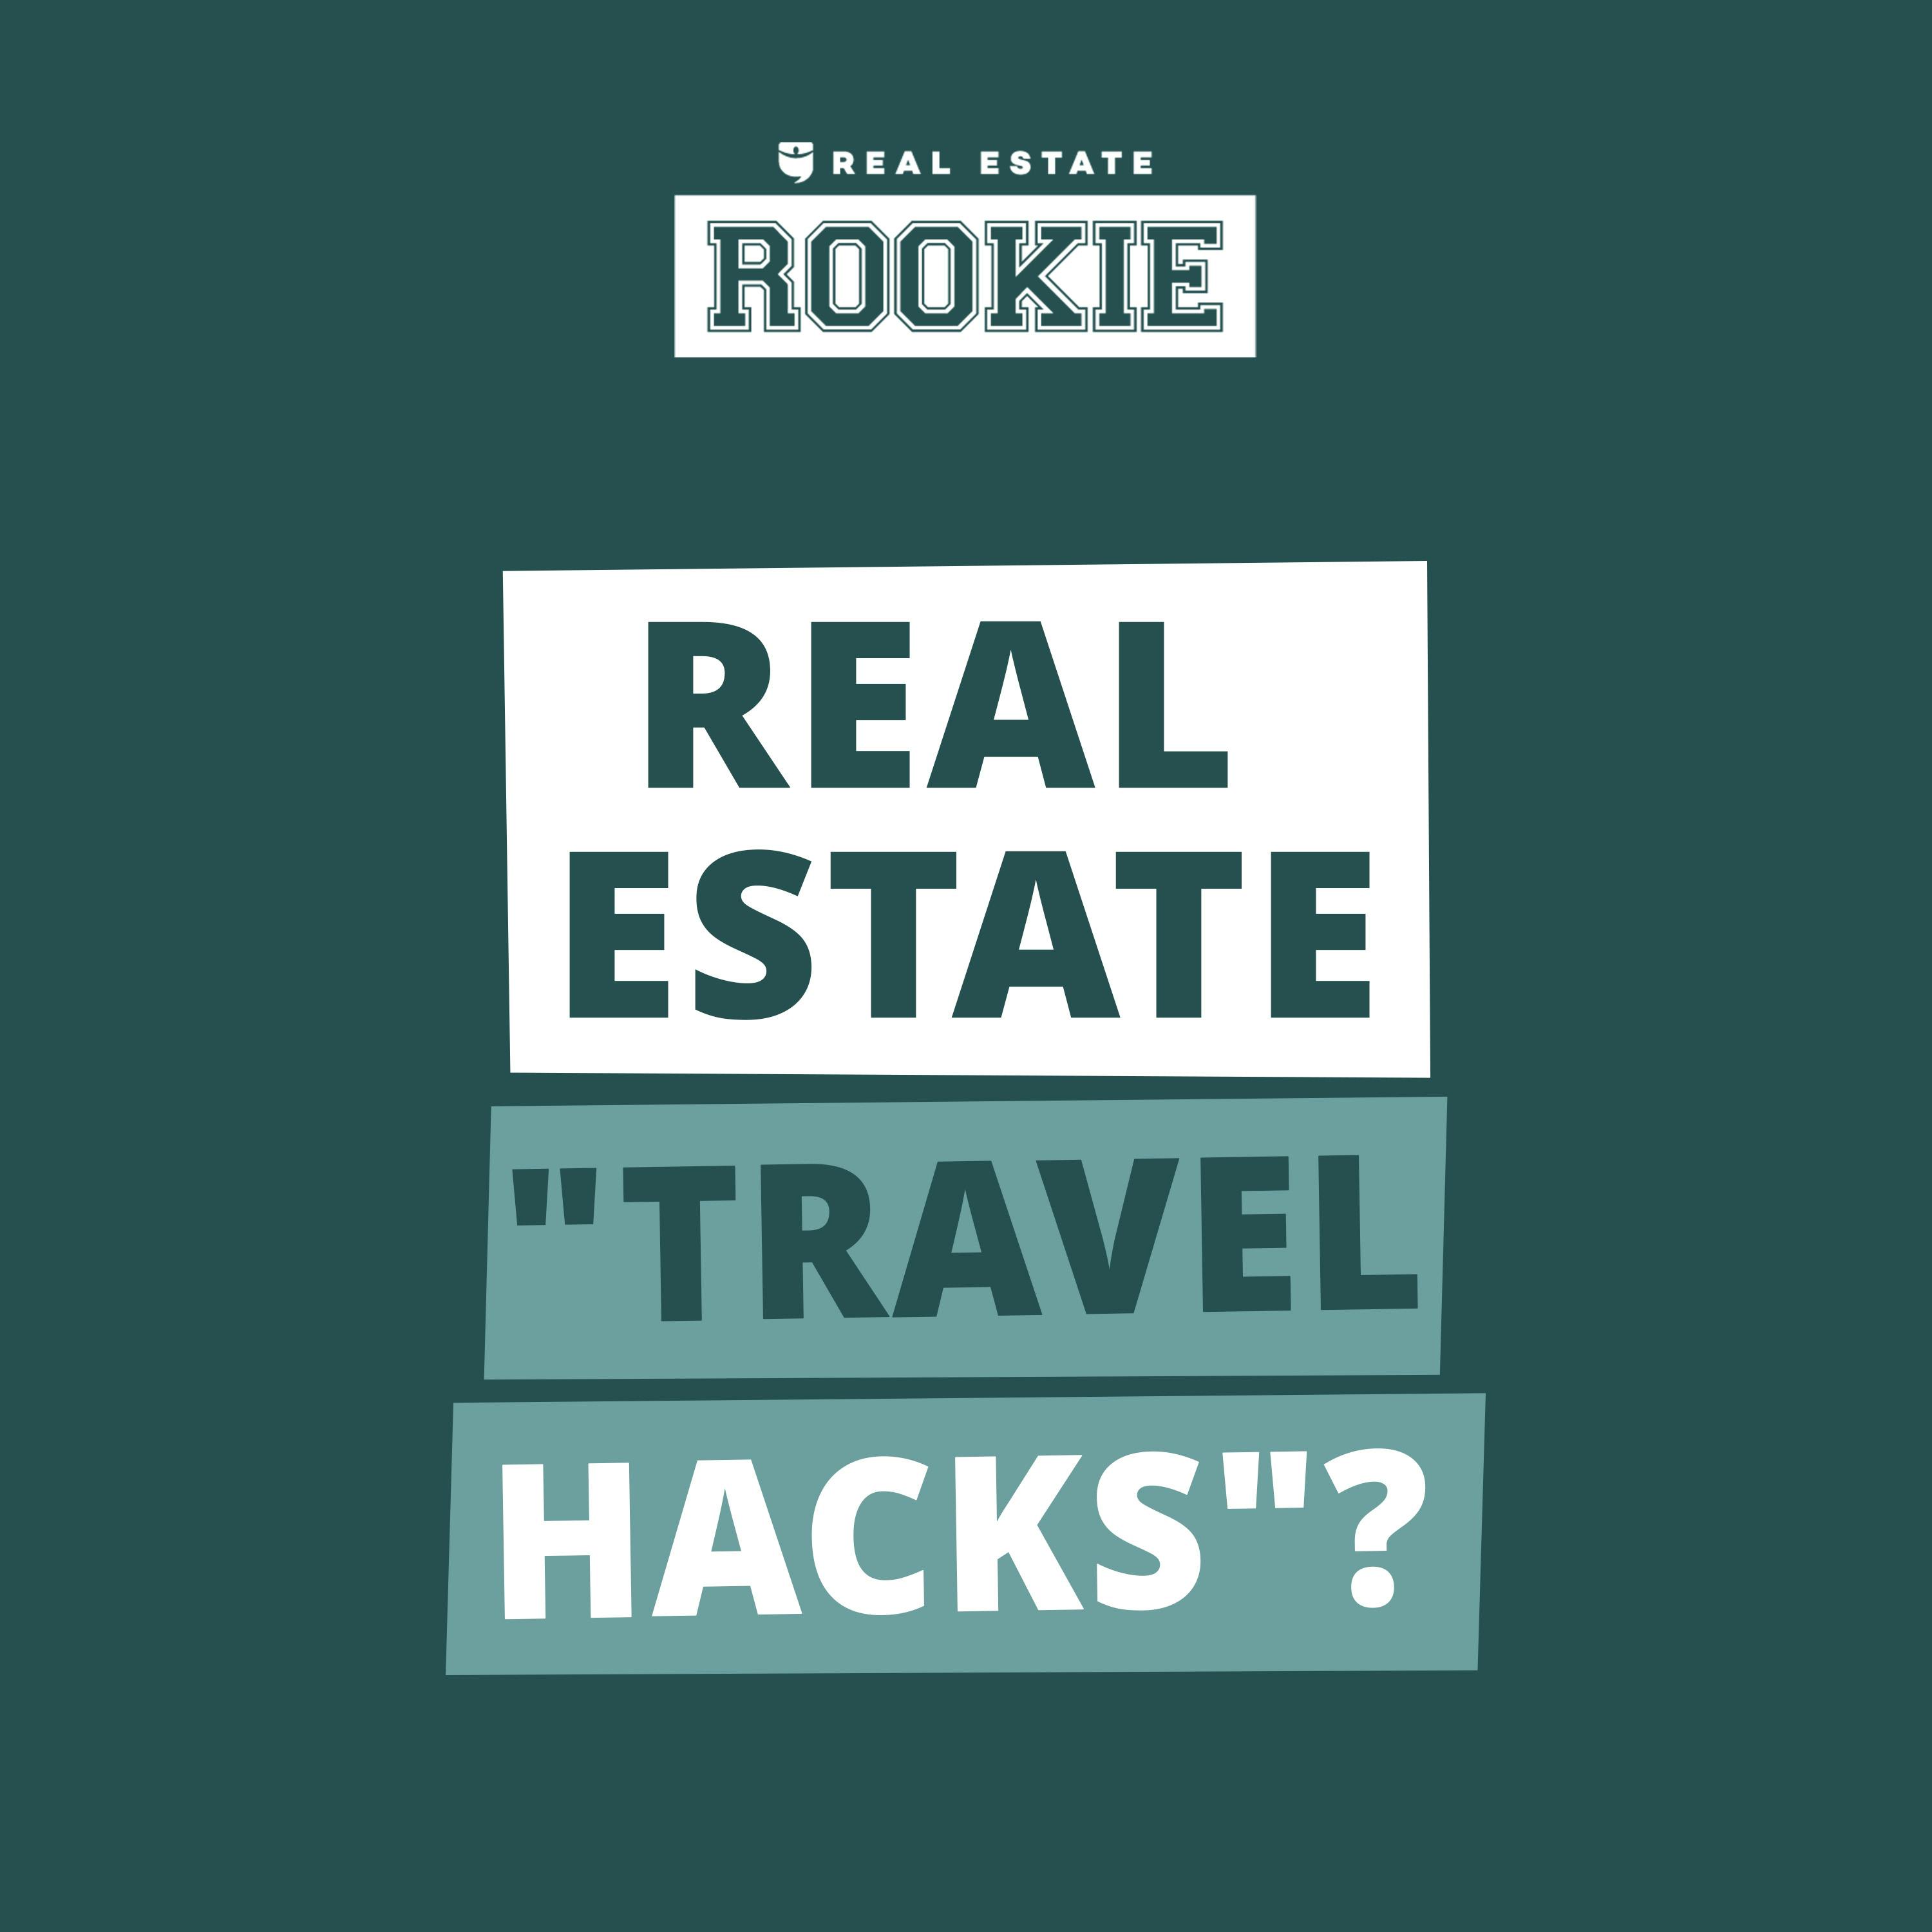 286: Rookie Reply: Real Estate "Travel Hacks" We Use to Score FREE Vacations